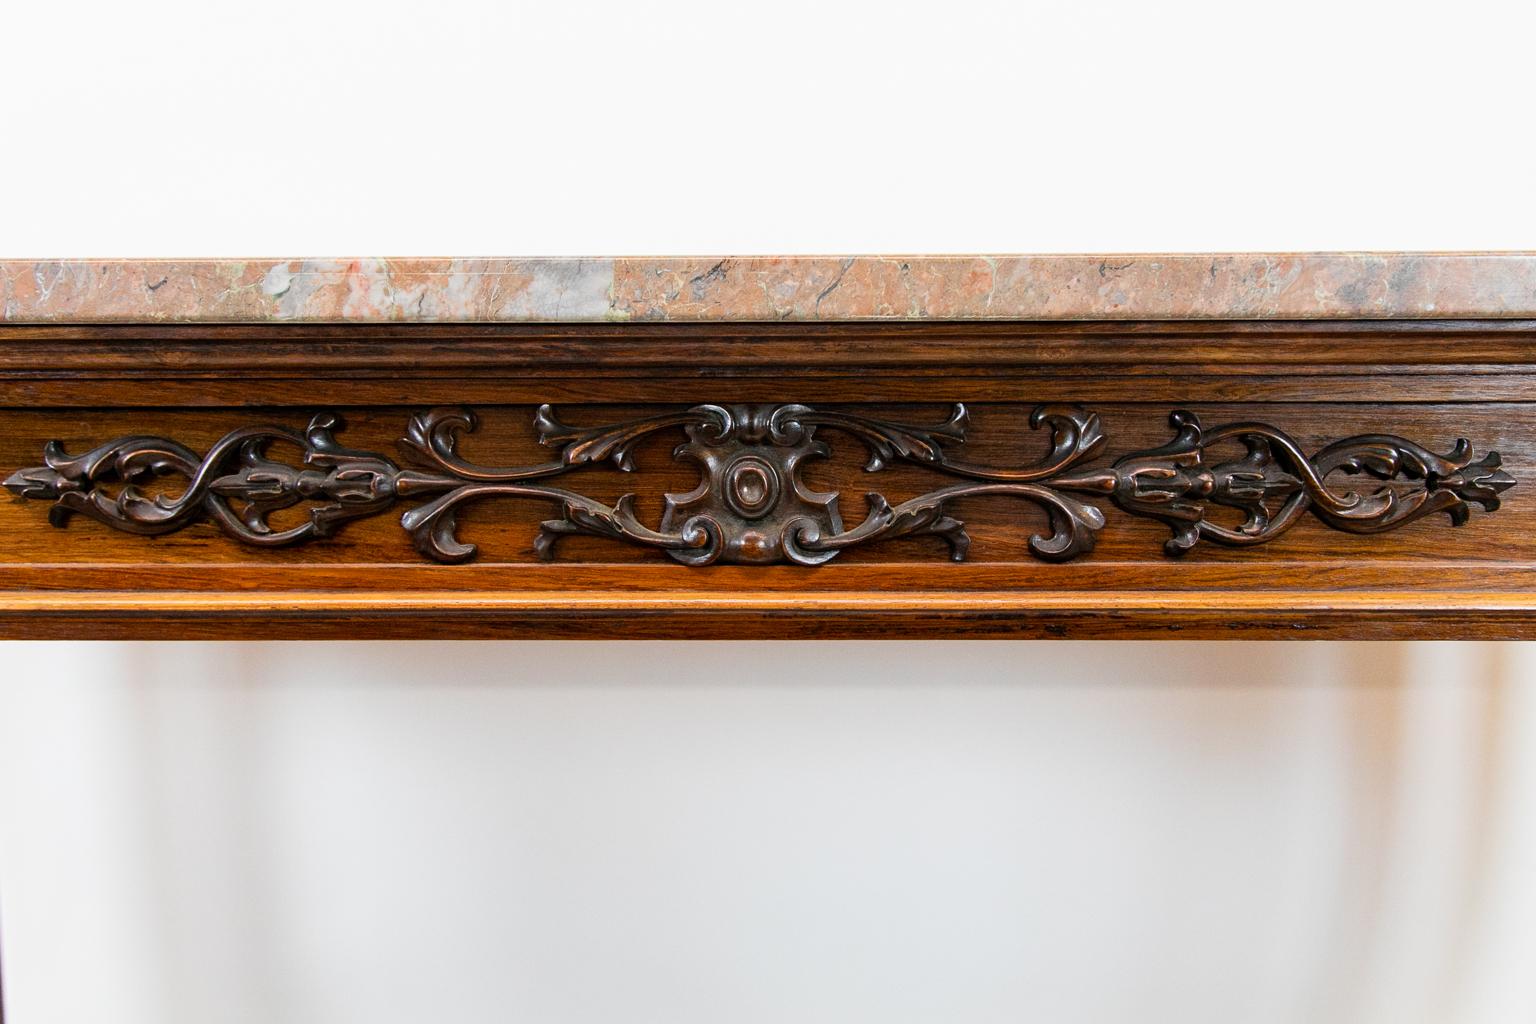 Carved rosewood English marble-top console table, with the marble having soft earth tones. The apron with central bellflower and floral appliqué in high relief, oval rosettes at each end. The front legs are fluted and reeded and terminate in